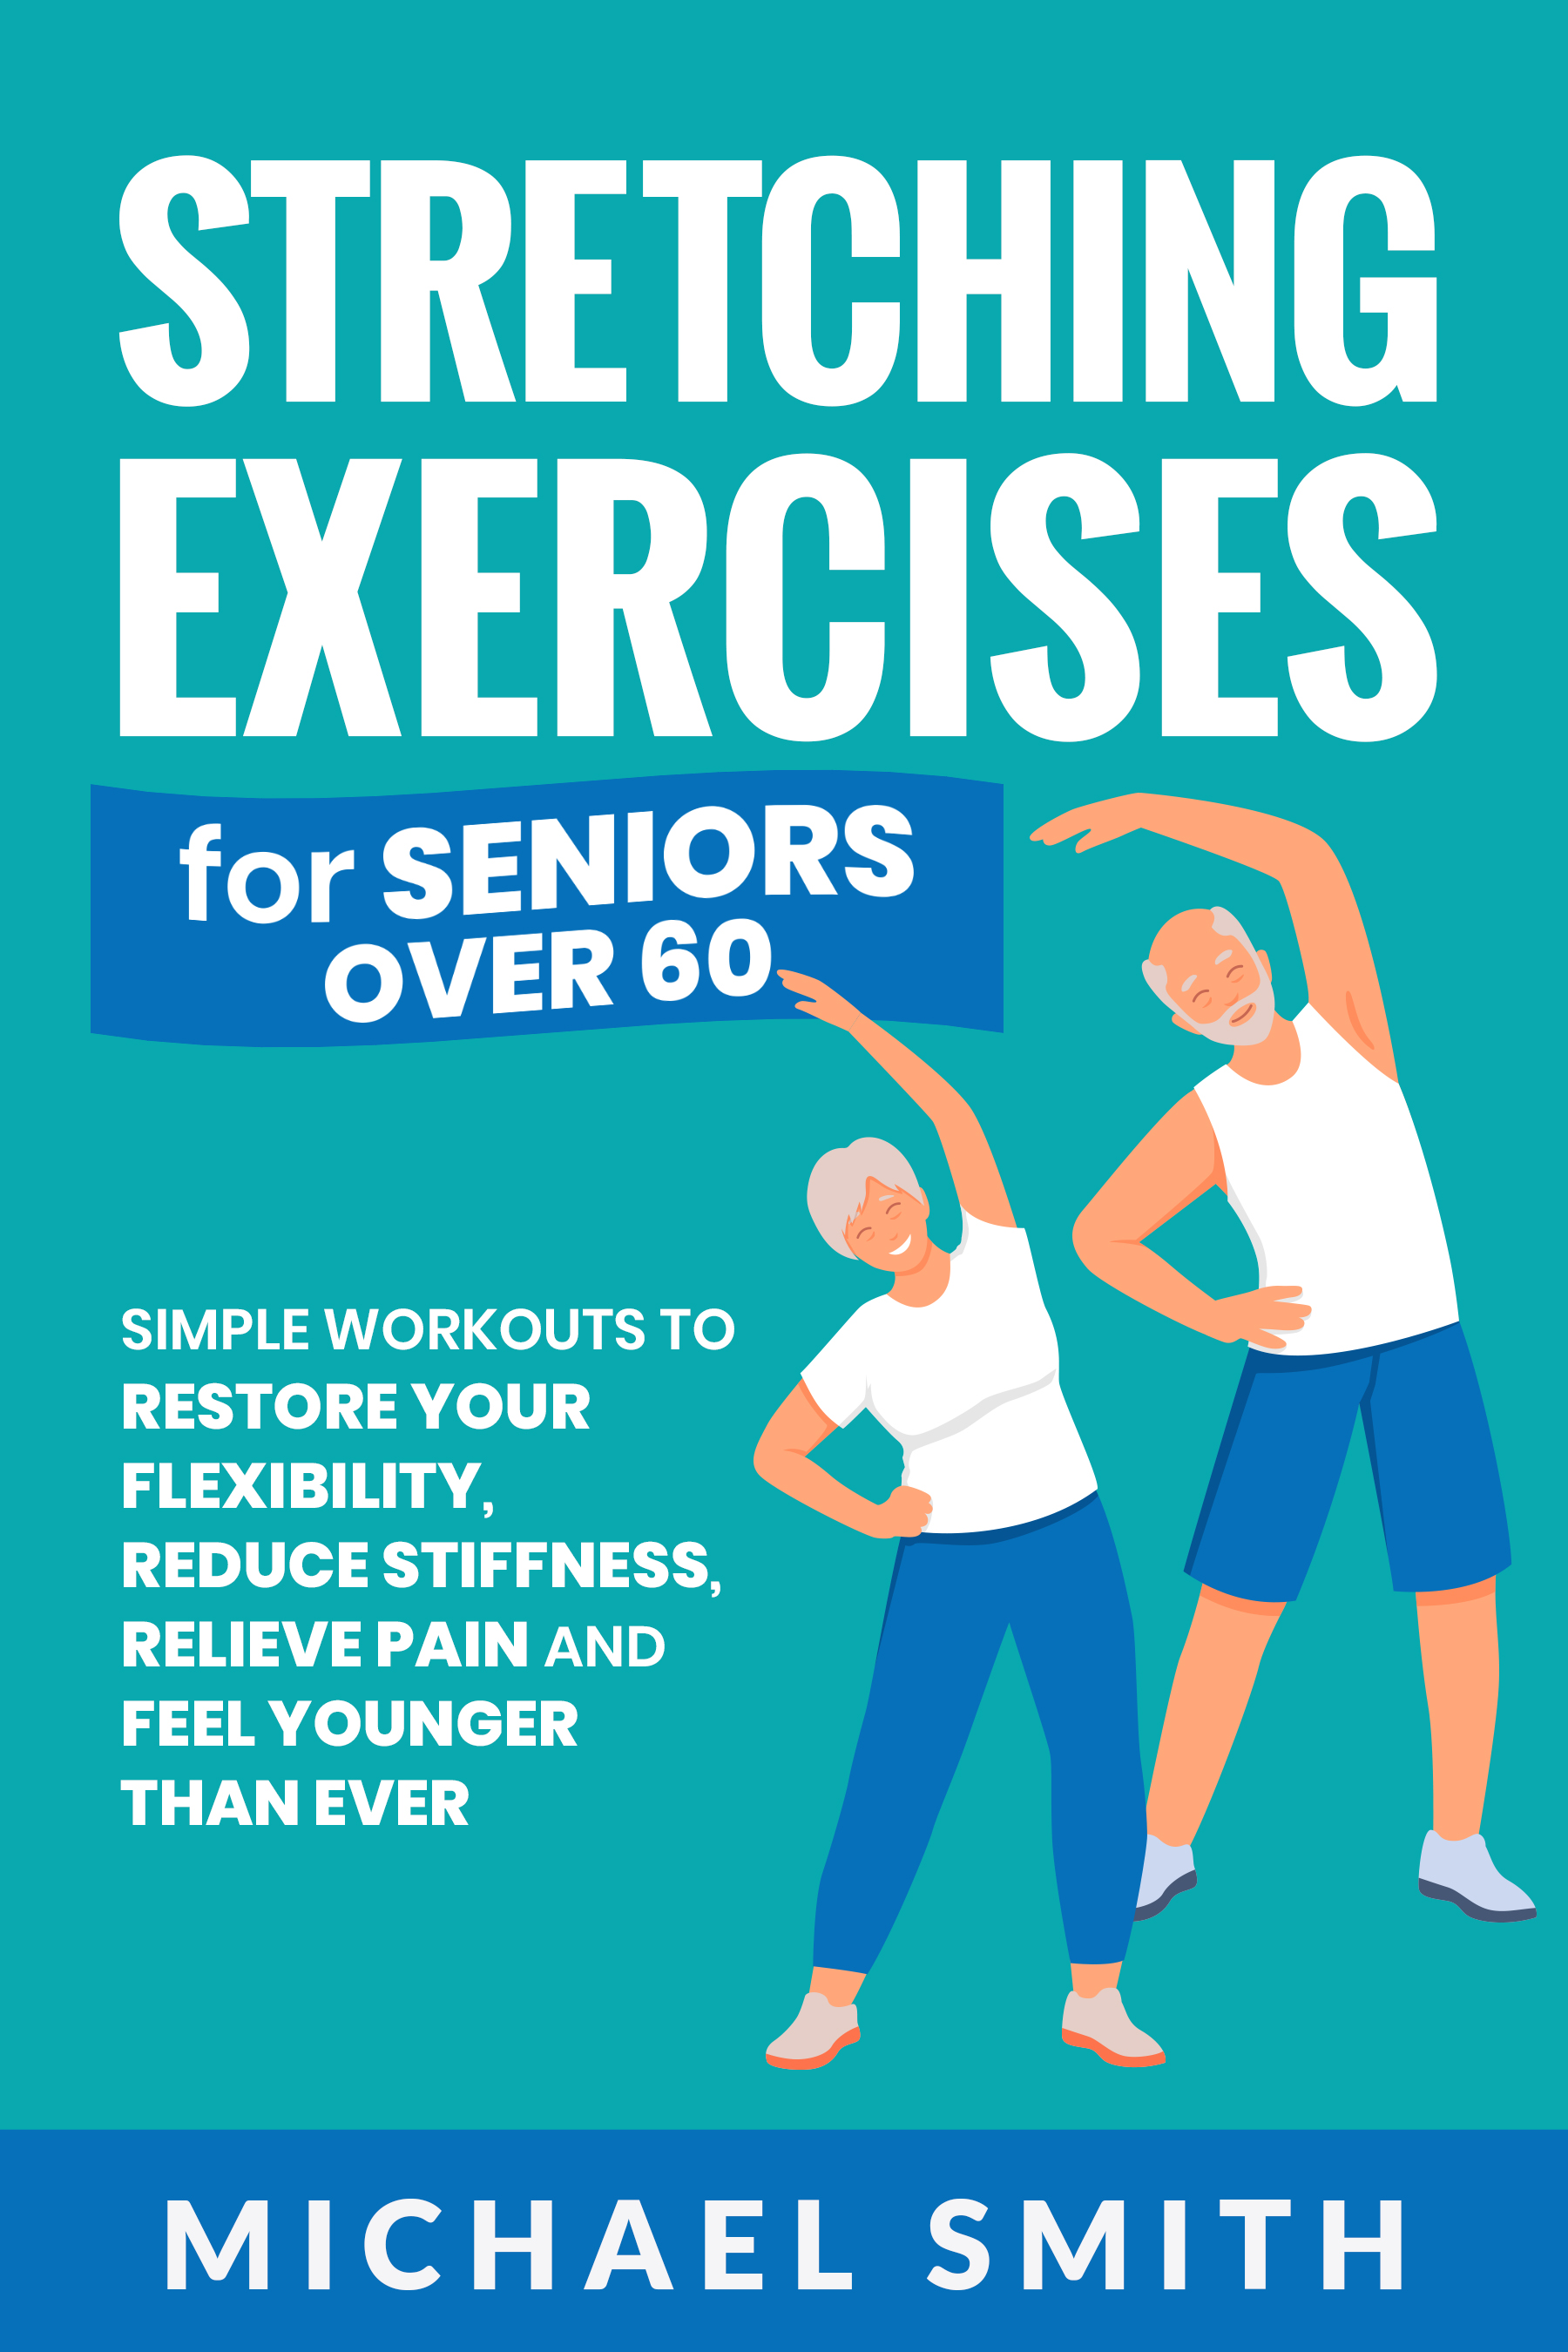 Viewing Stretching Exercises for Seniors over 60: Simple Workouts to  Restore Your Flexibility, Reduce Stiffness, Relieve Pain, and Feel Younger  than Ever Review Copy